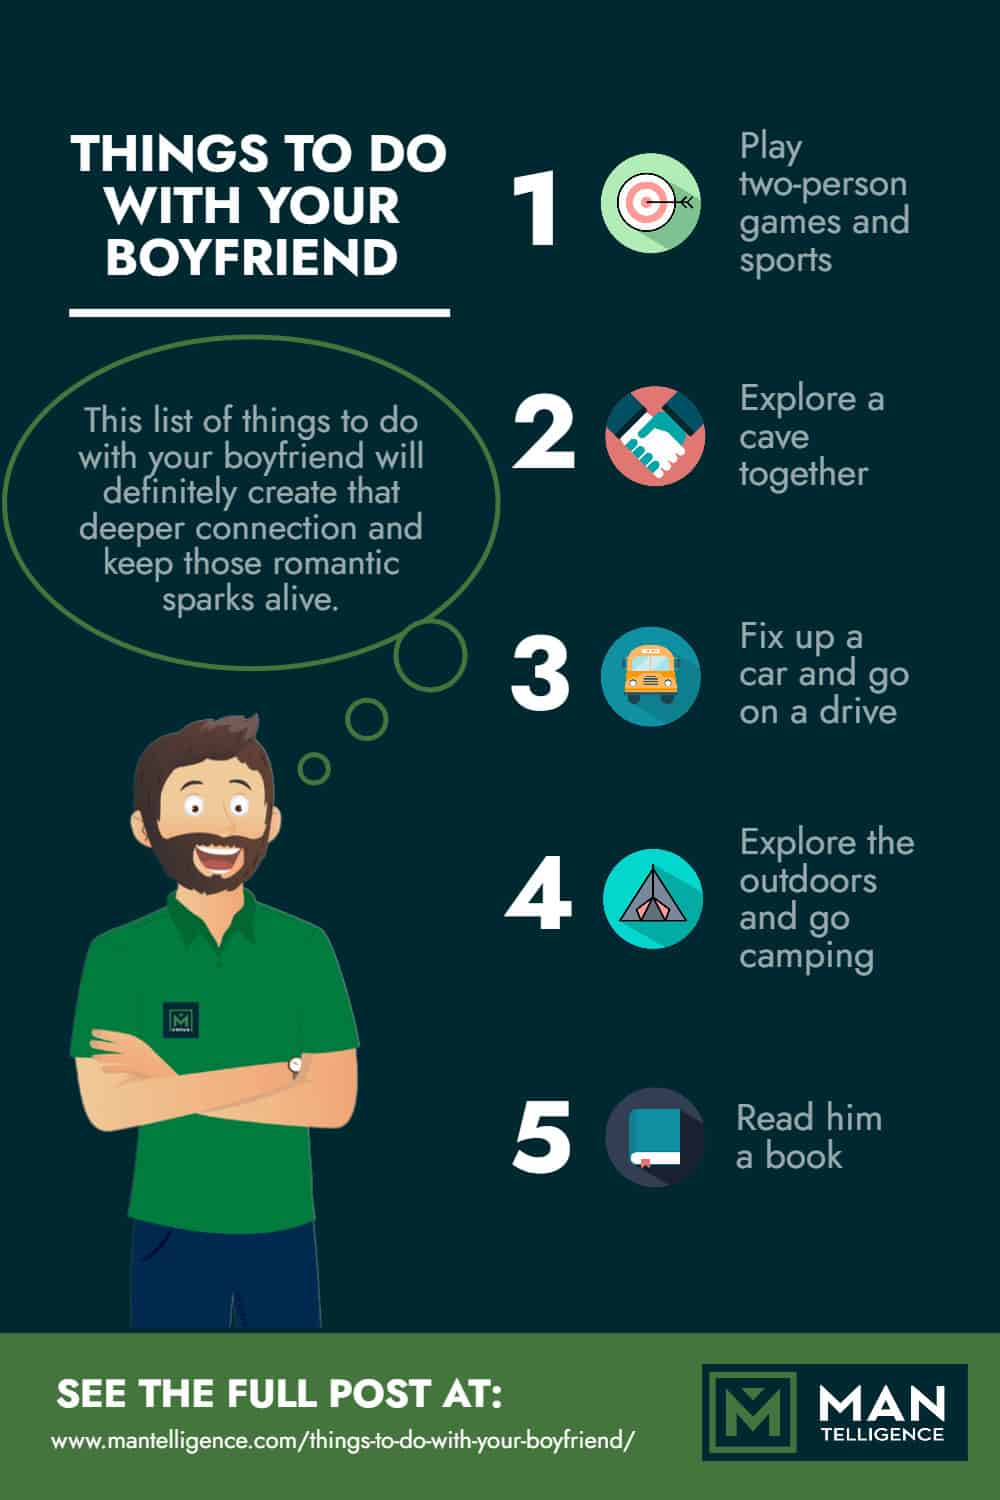 Things to do with your boyfriend - Infographic